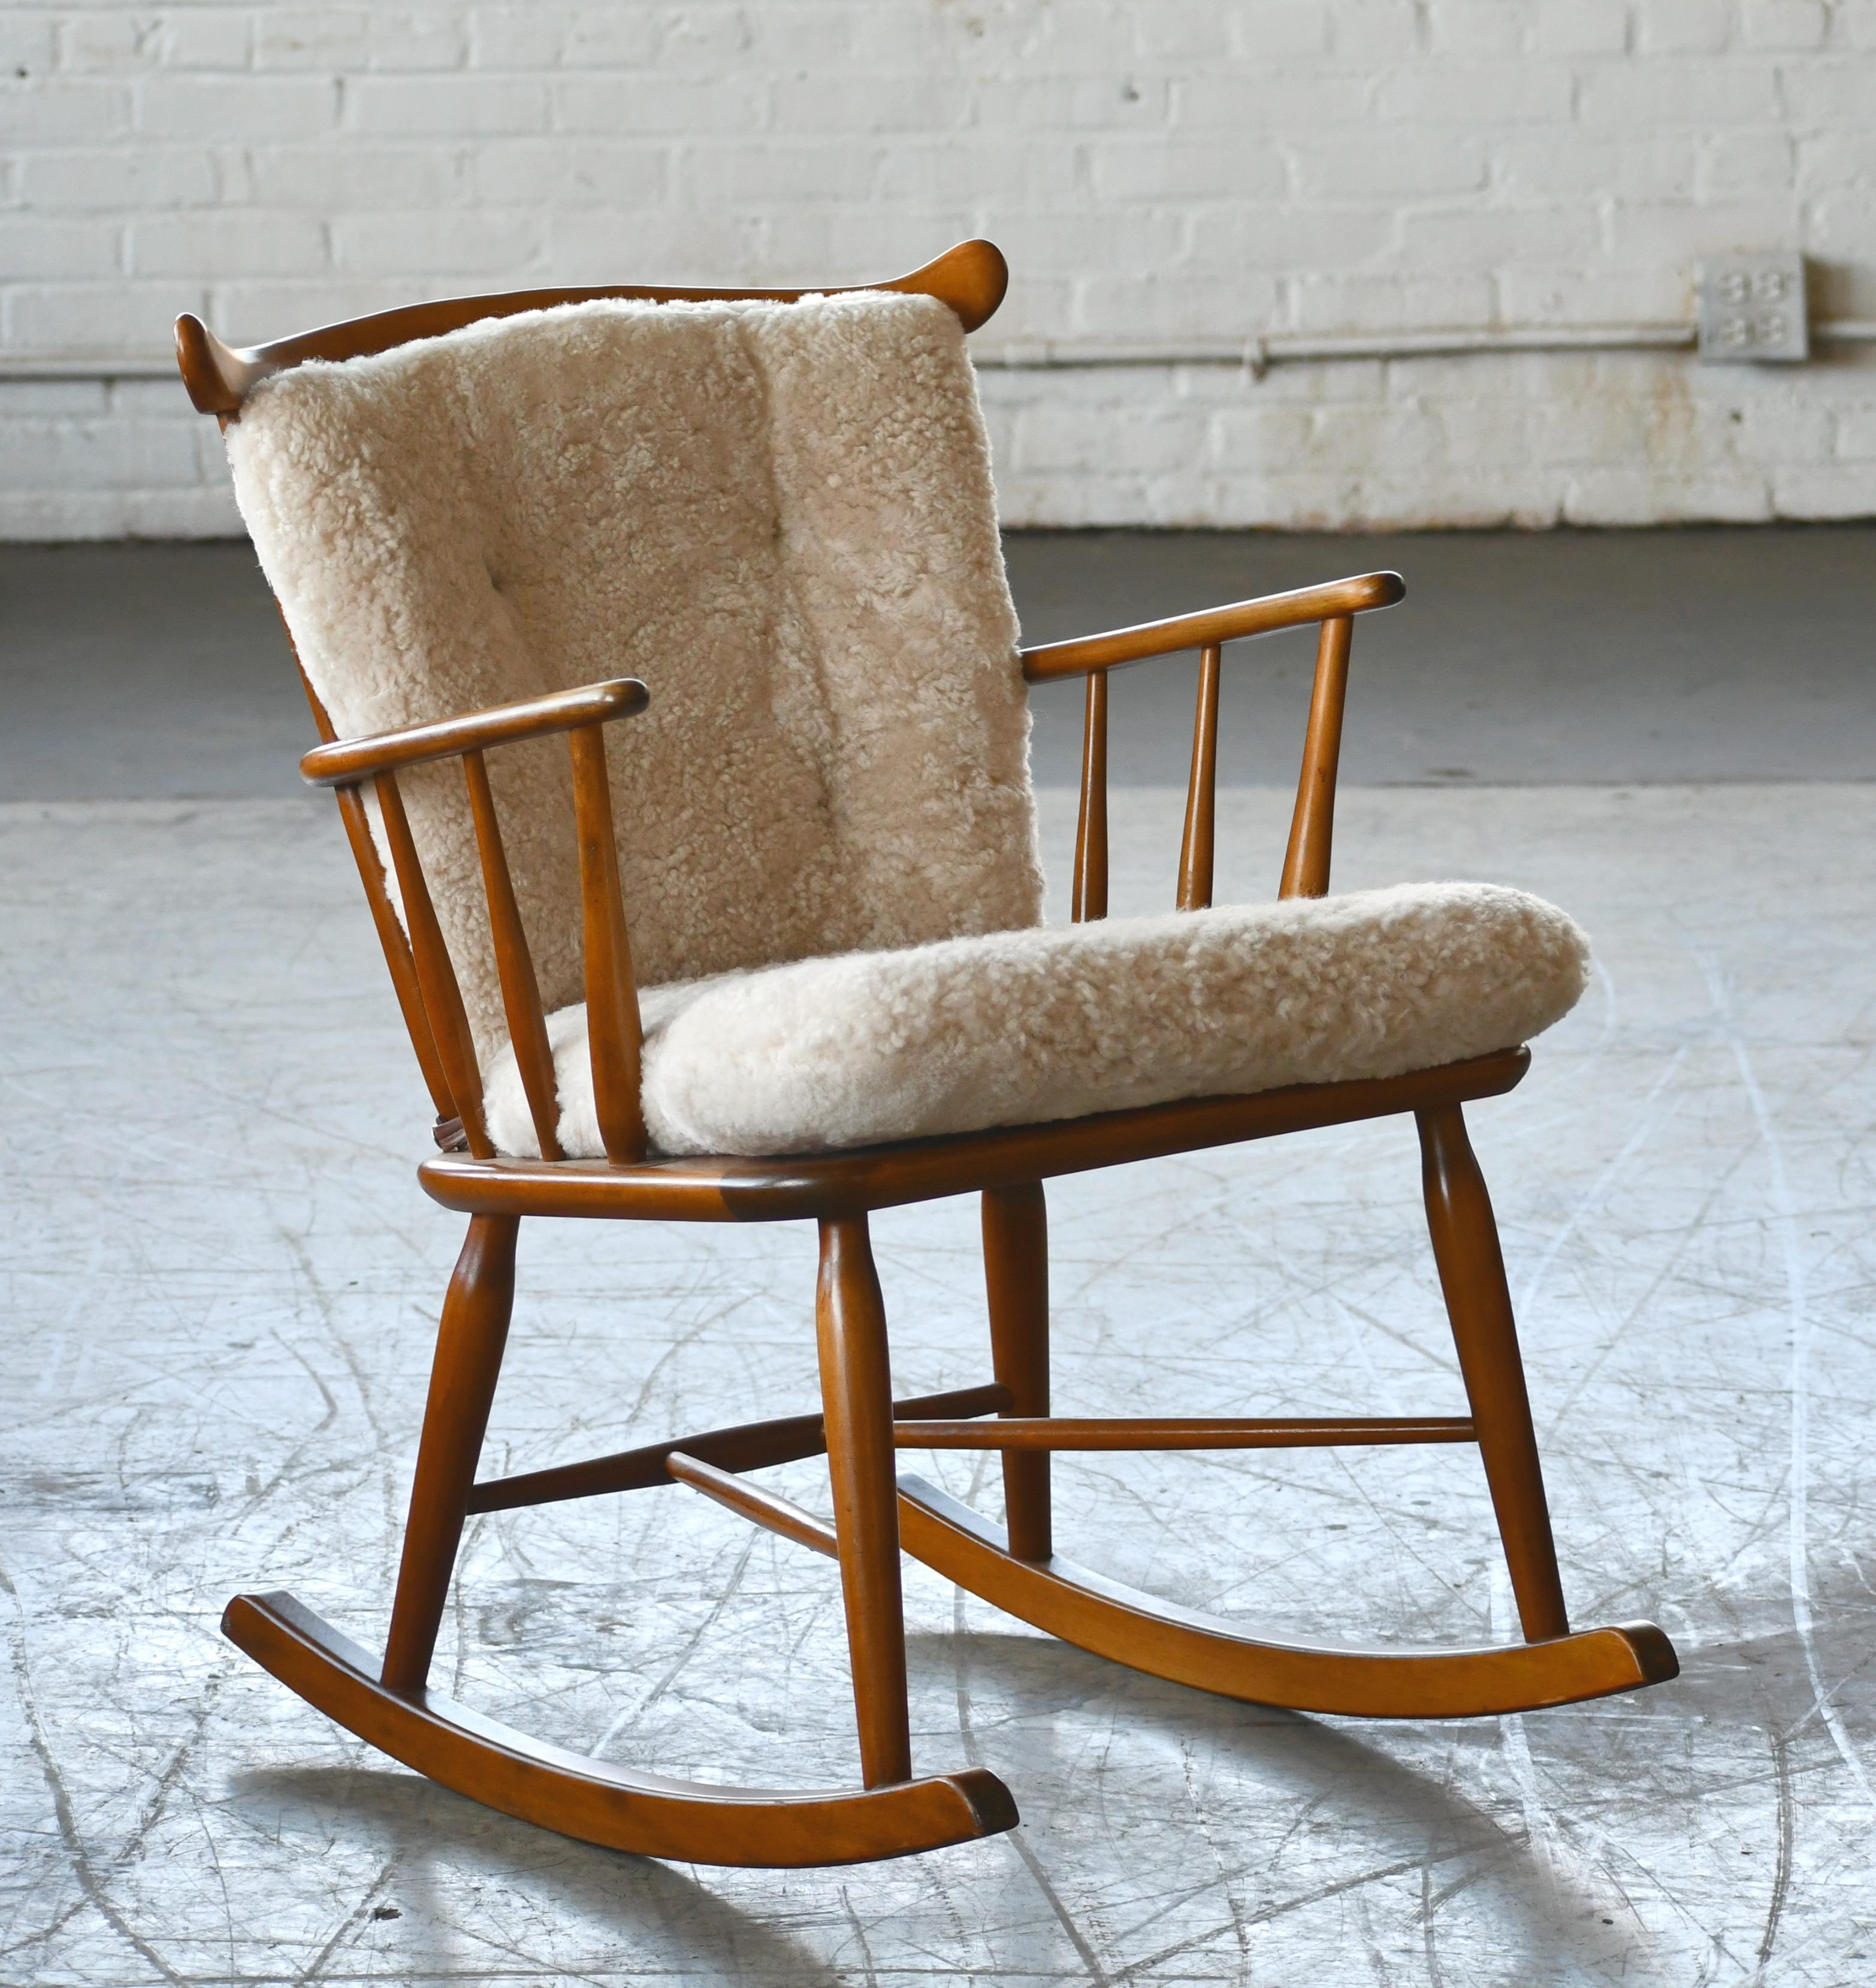 Great little low back spindle back rocking chair from Faarstrup Mobler, Denmark made circa 1950. We re-upholstered the chair with new cushions in an exuberant curly sheepskin in a putty color and cognac colored leather buttons that just sucks you